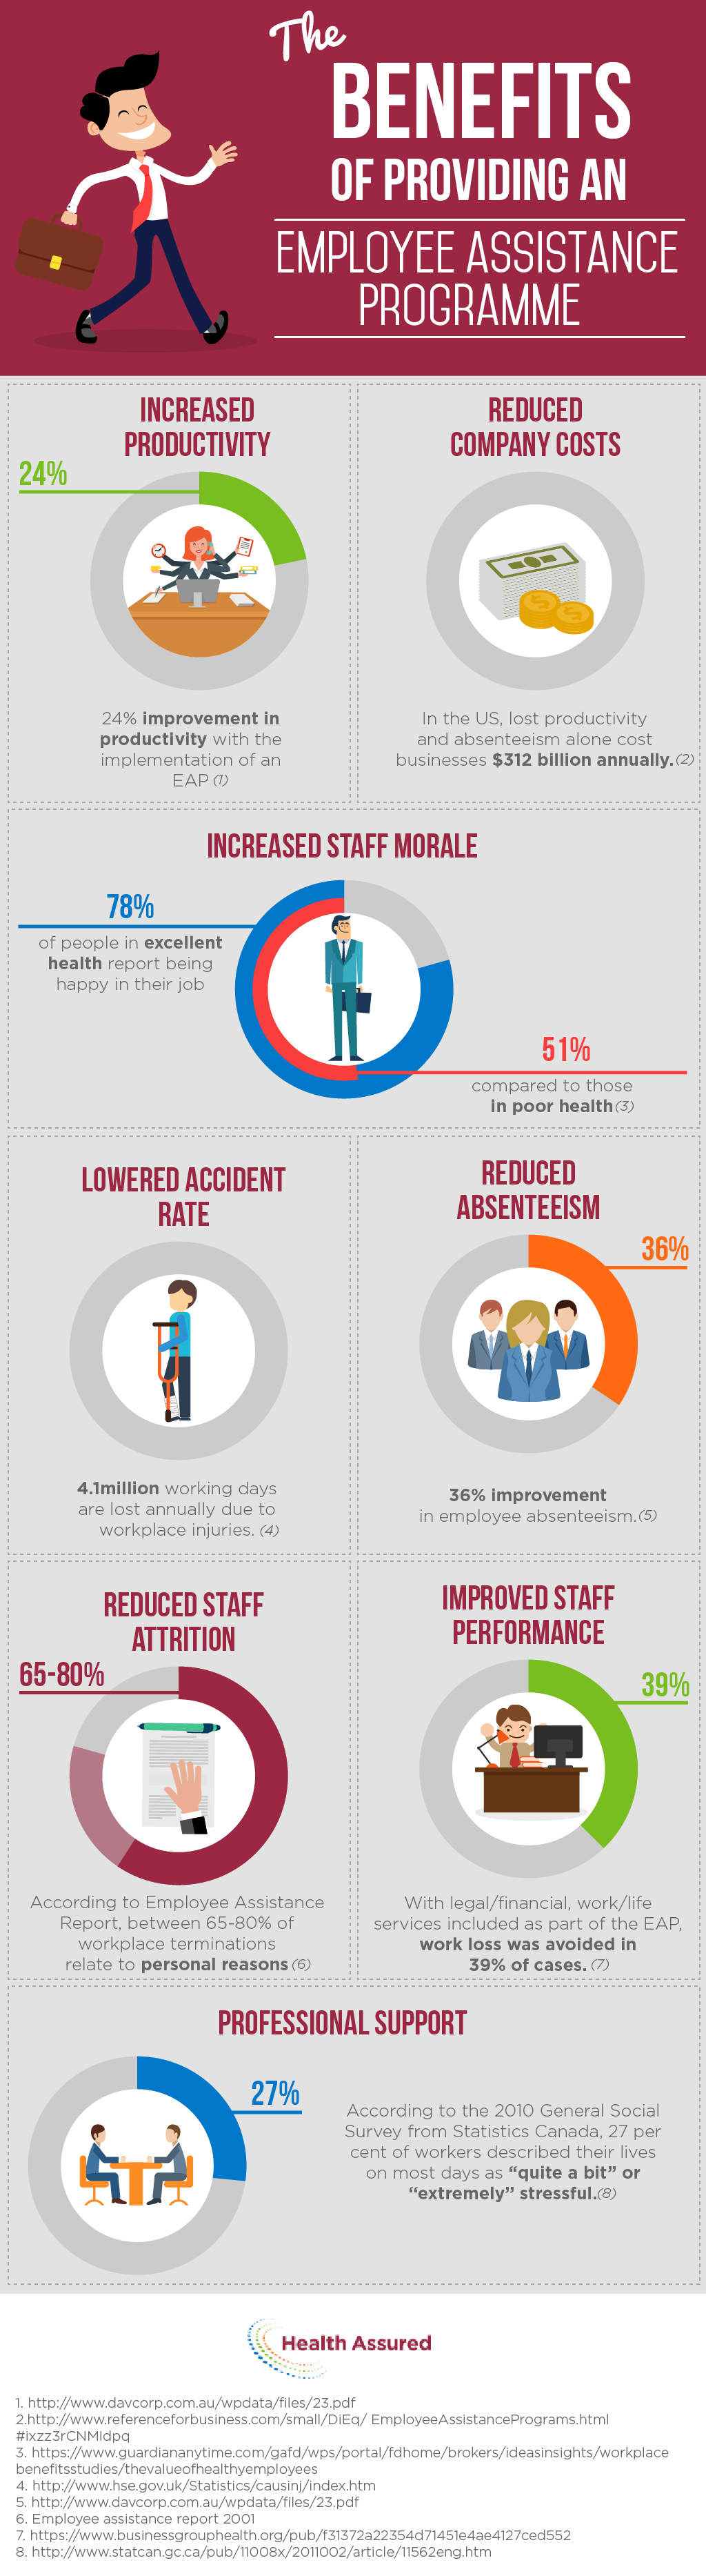 Benefits of an EAP infographic